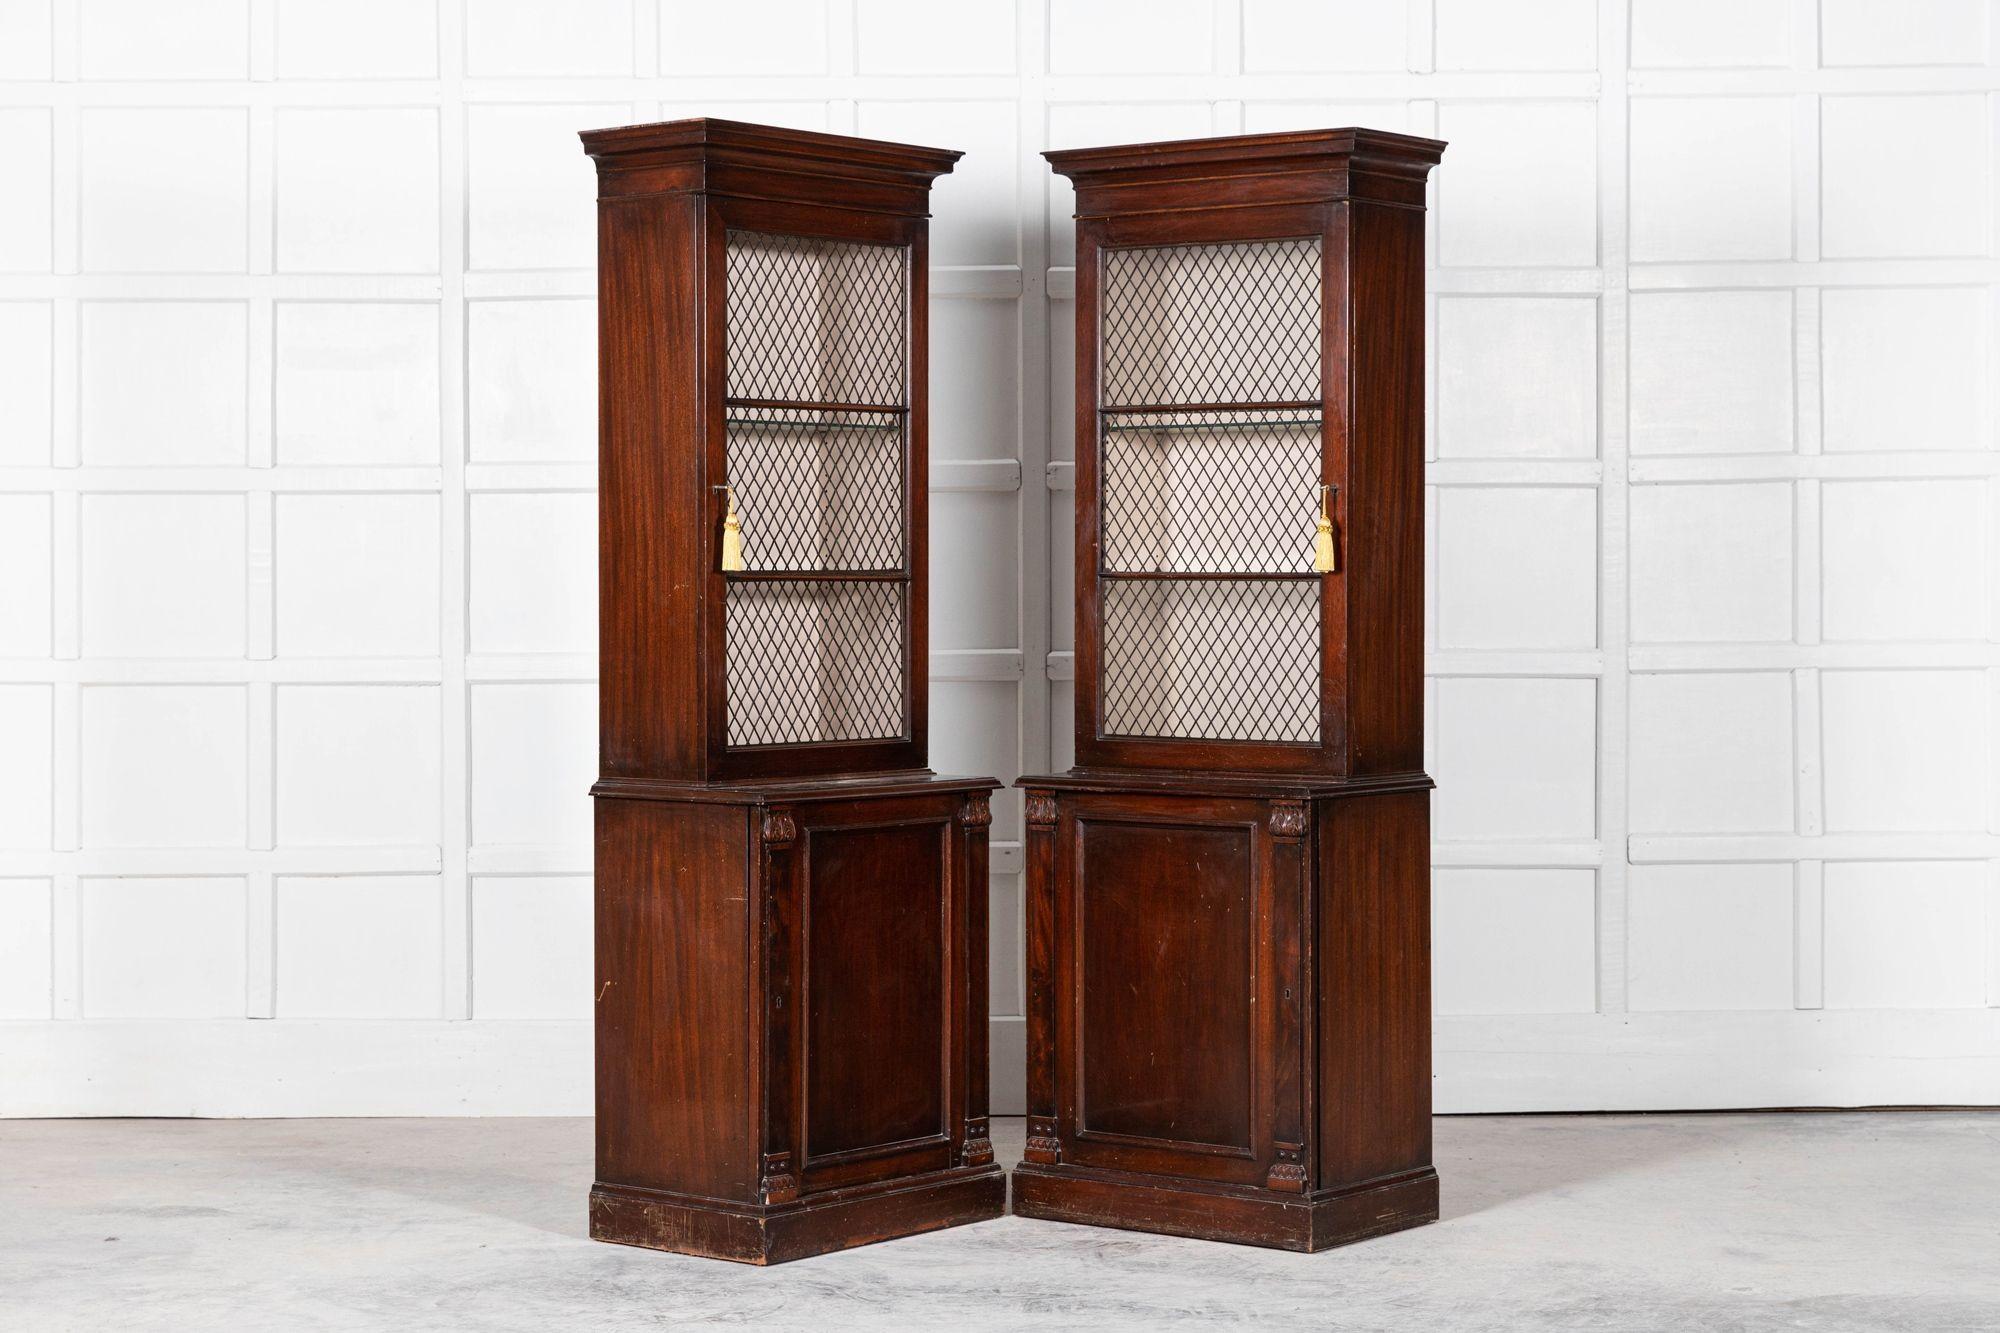 circa 1895
Pair 19thC English Mahogany Glazed Cabinets , Georgian Style with Brass Grilled Doors and glass shelves
With keys
 
Measures: W67 x D41 x H190cm.